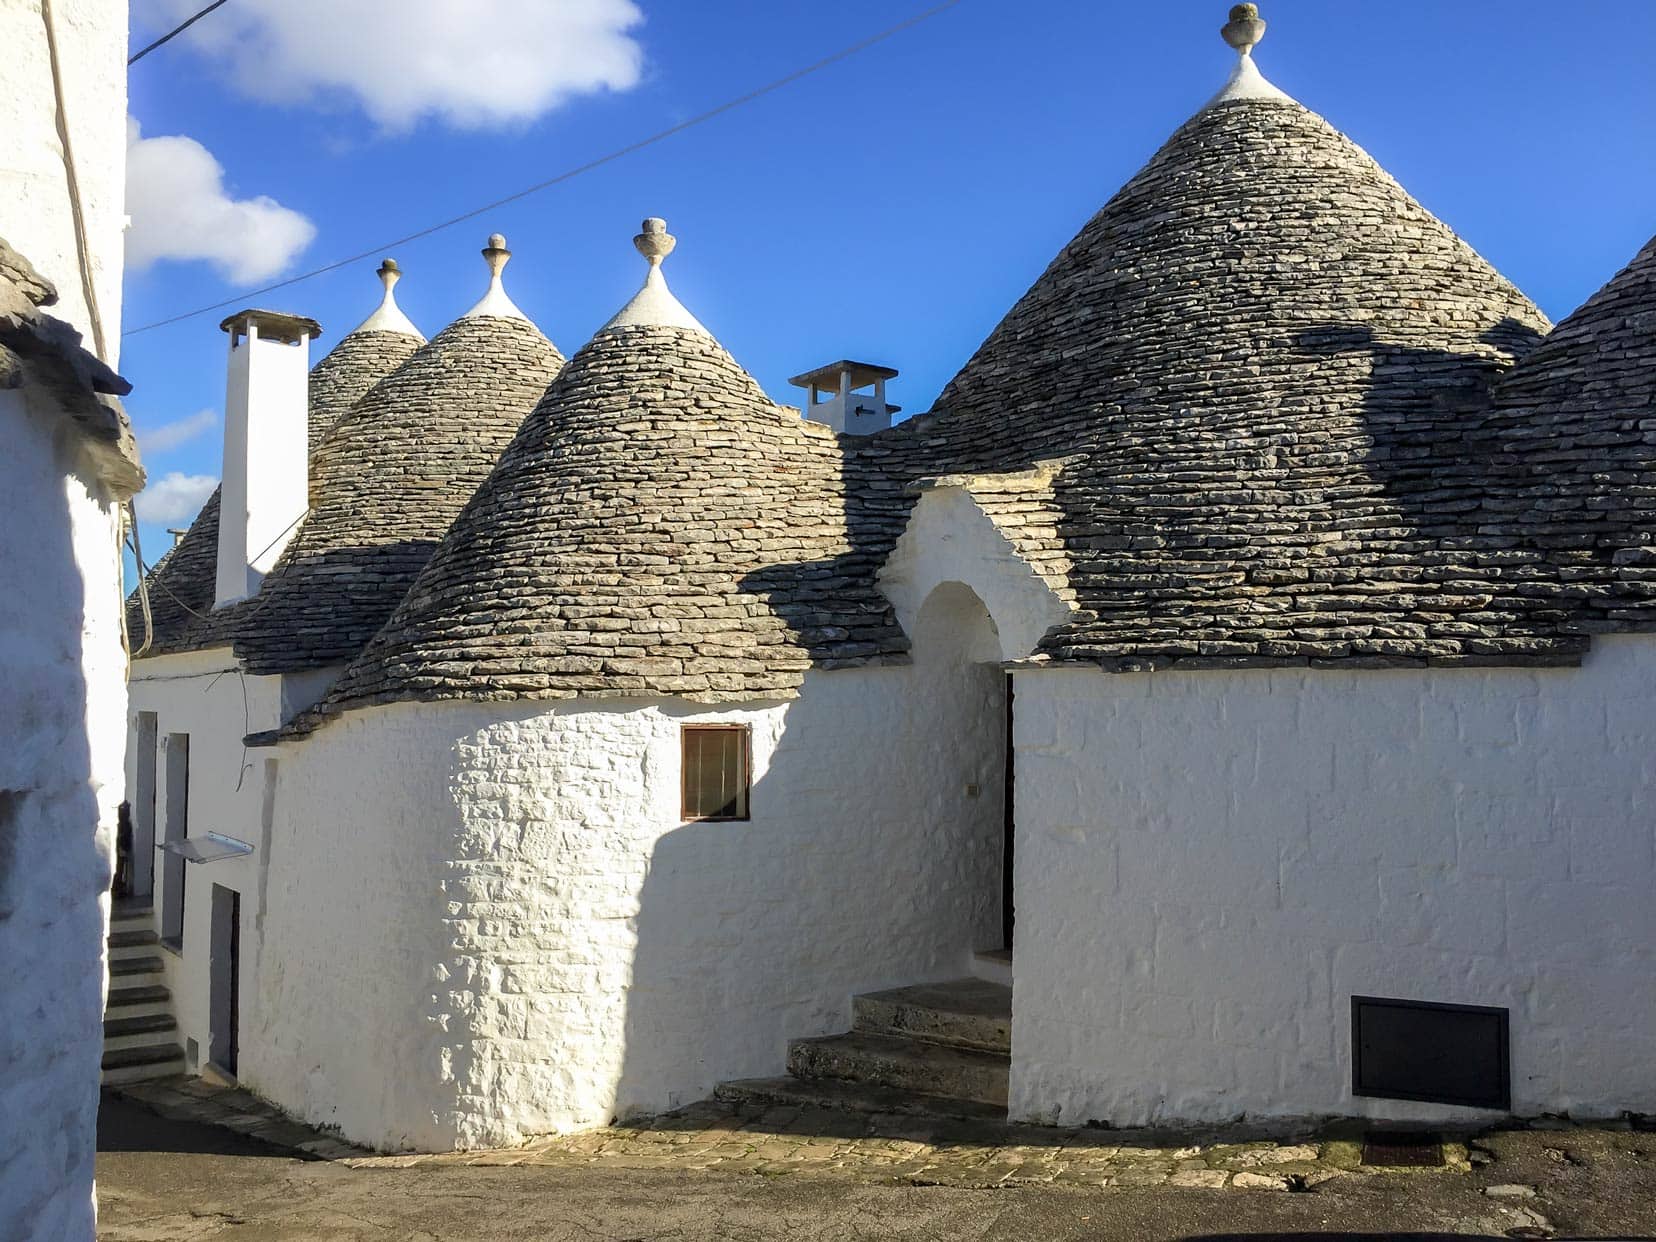 Trulli buildings with grey stone coned roofs and white washed walls 